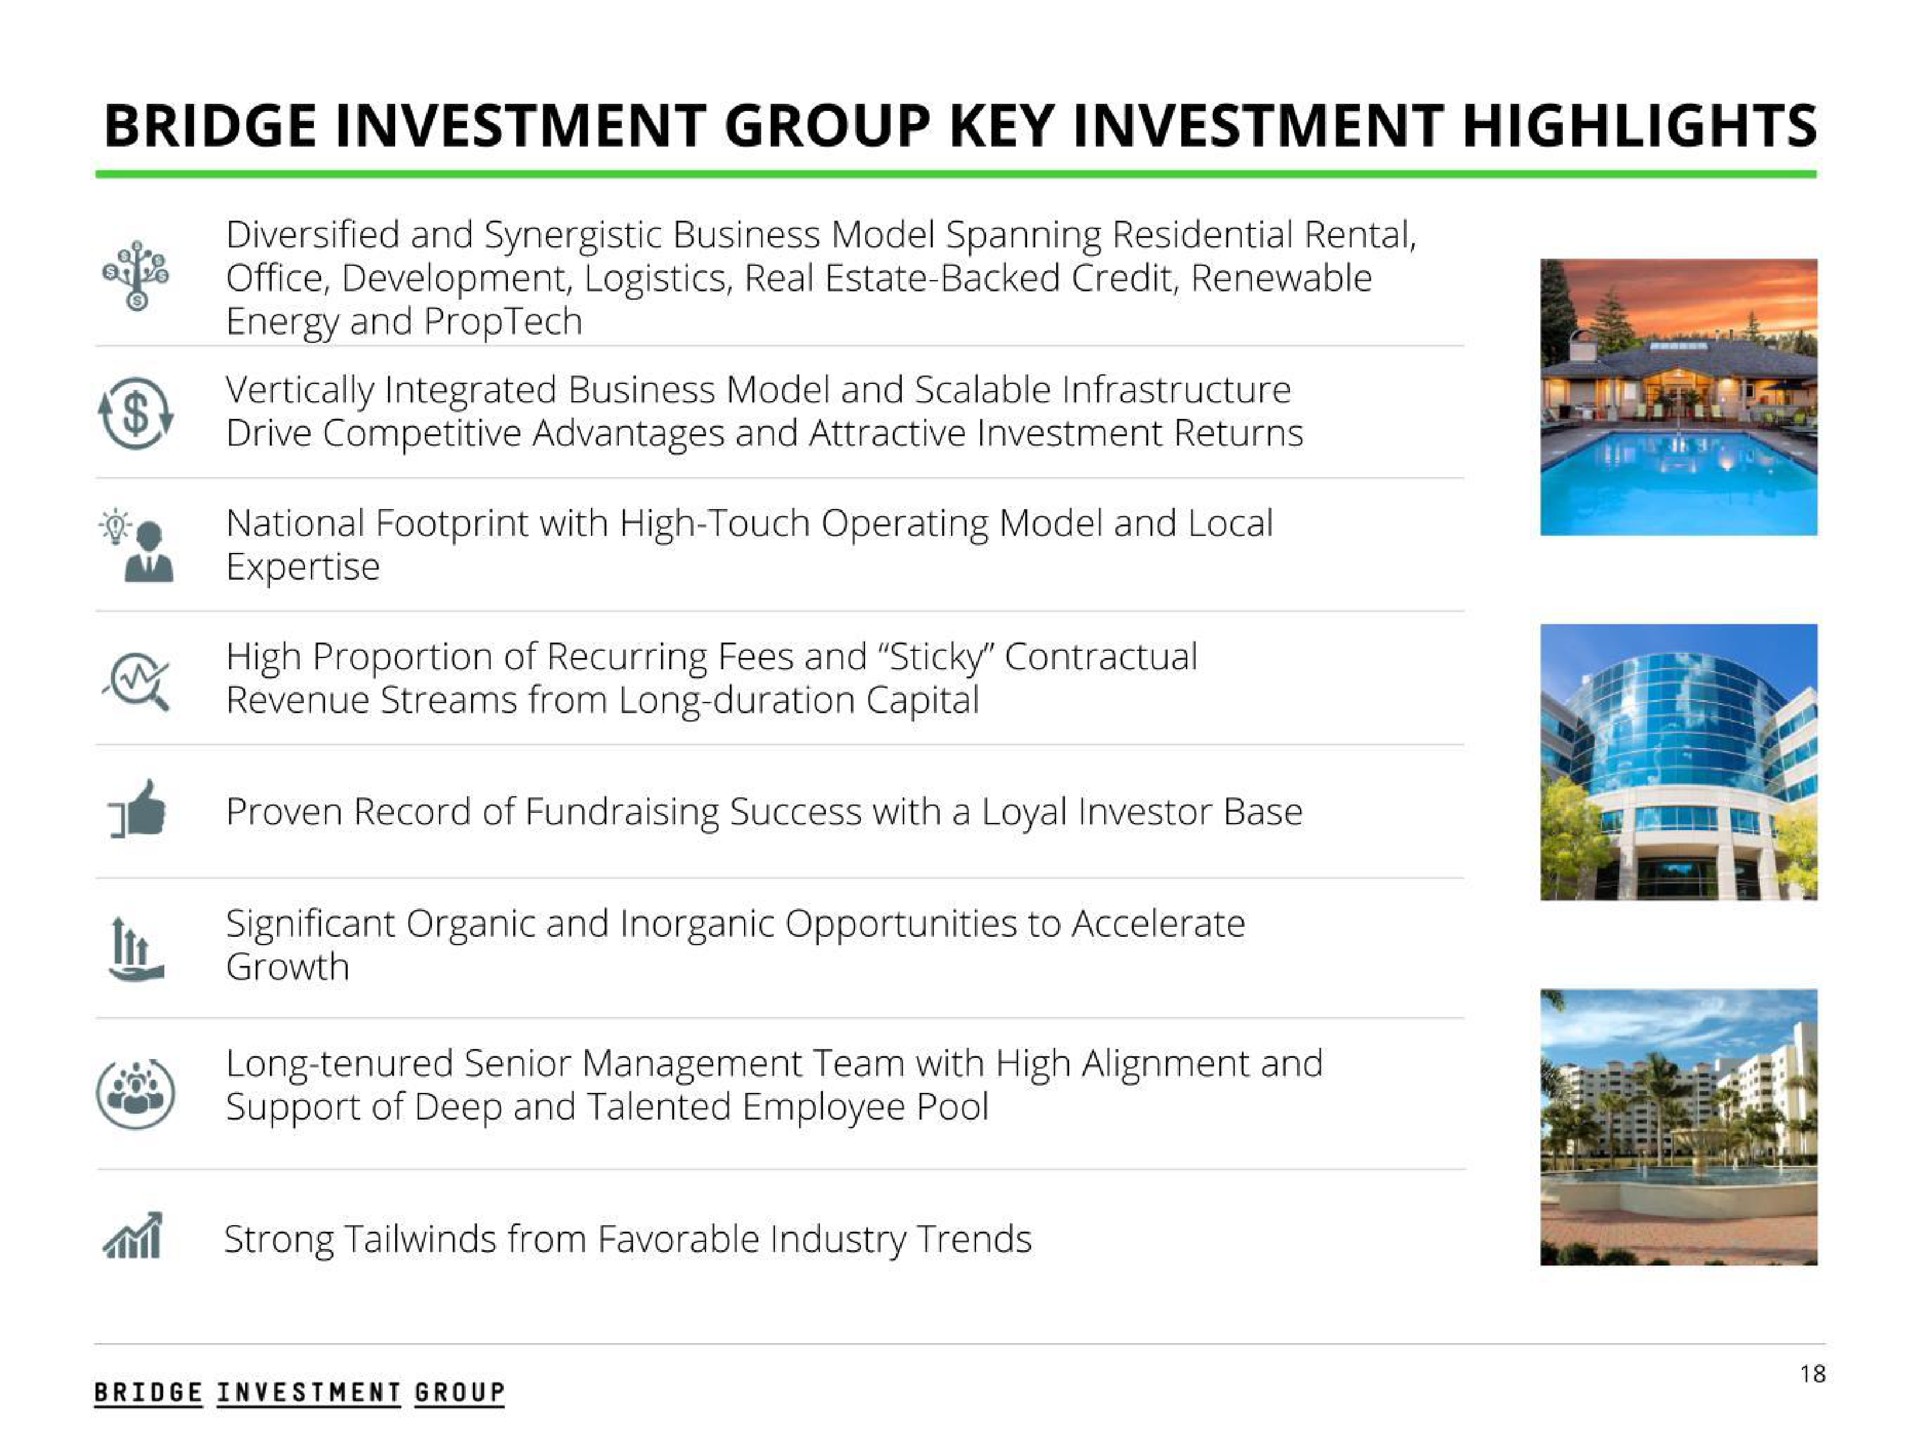 bridge investment group key investment highlights long tenured senior management team with high alignment and | Bridge Investment Group